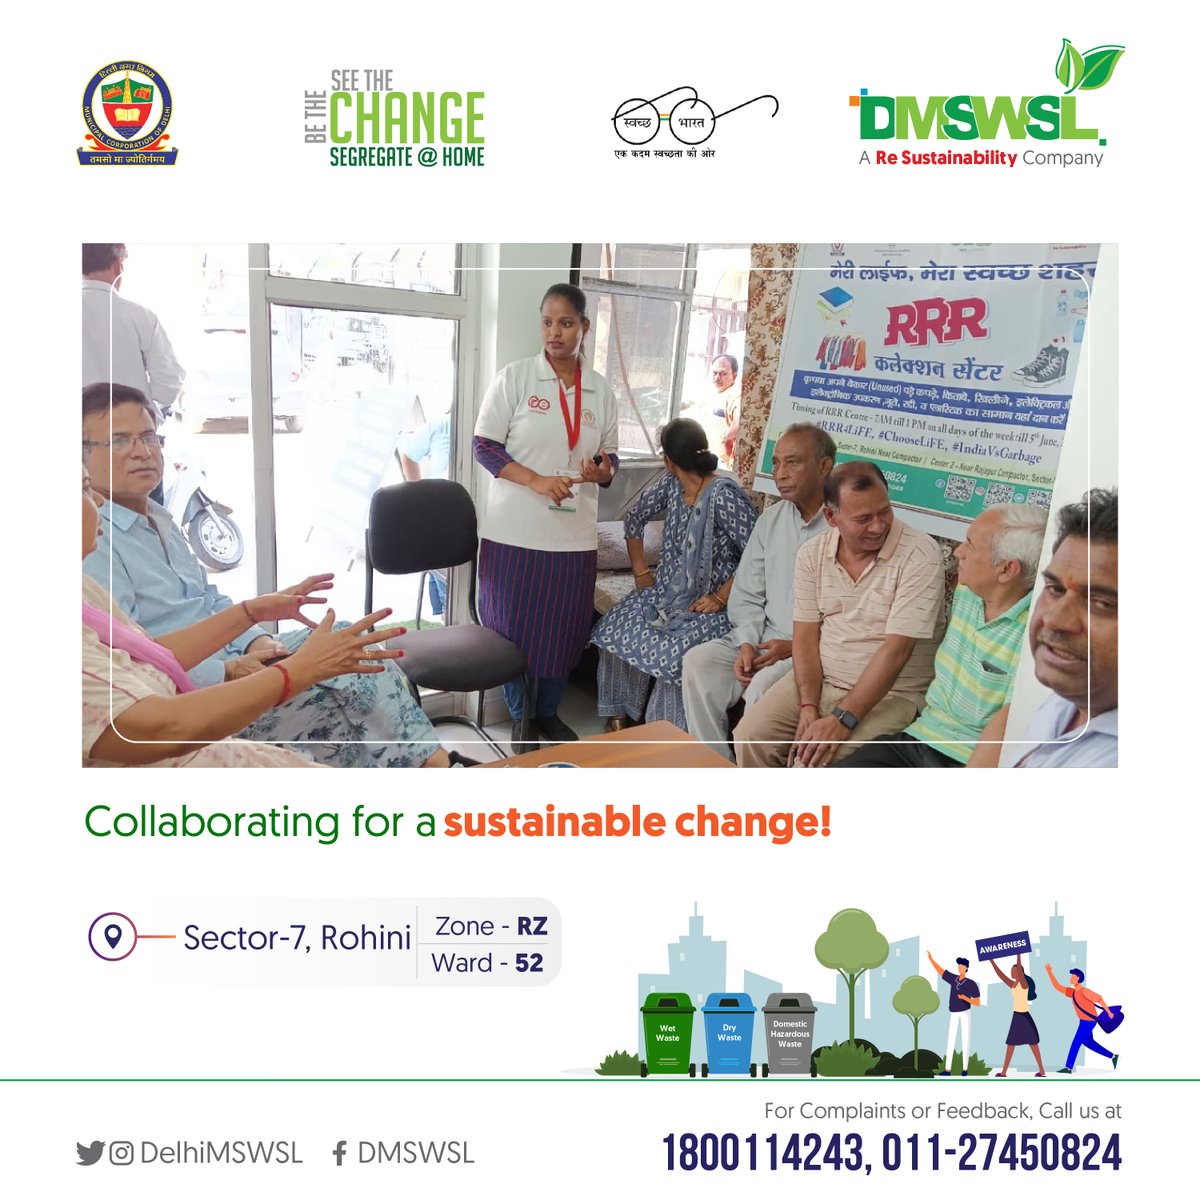 Join us for an empowering workshop with the RWA at the RRR Center! Let's embrace the 3Rs for a cleaner, greener future. Together, we can make a positive impact. #WorkshopWithRWA #RRRCenter#Sustainability #SwachhShehar